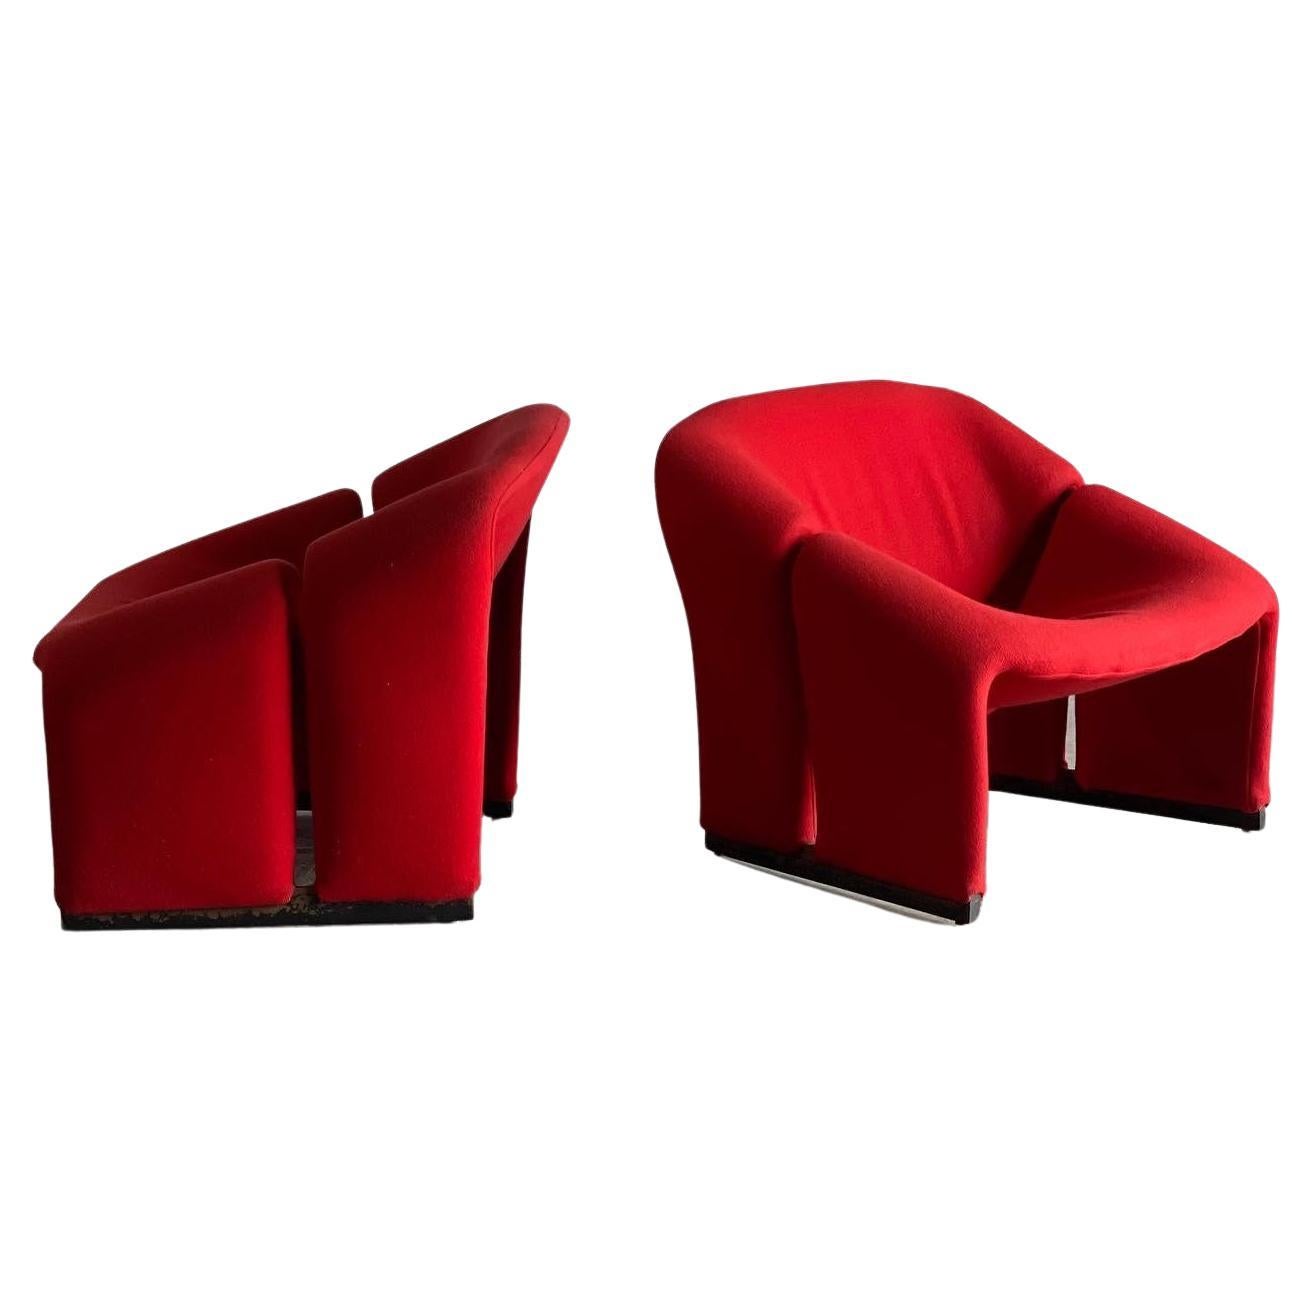 Pair of 1st Edition Pierre Paulin F580 Groovy Chairs by Pierre Paulin, Artifort